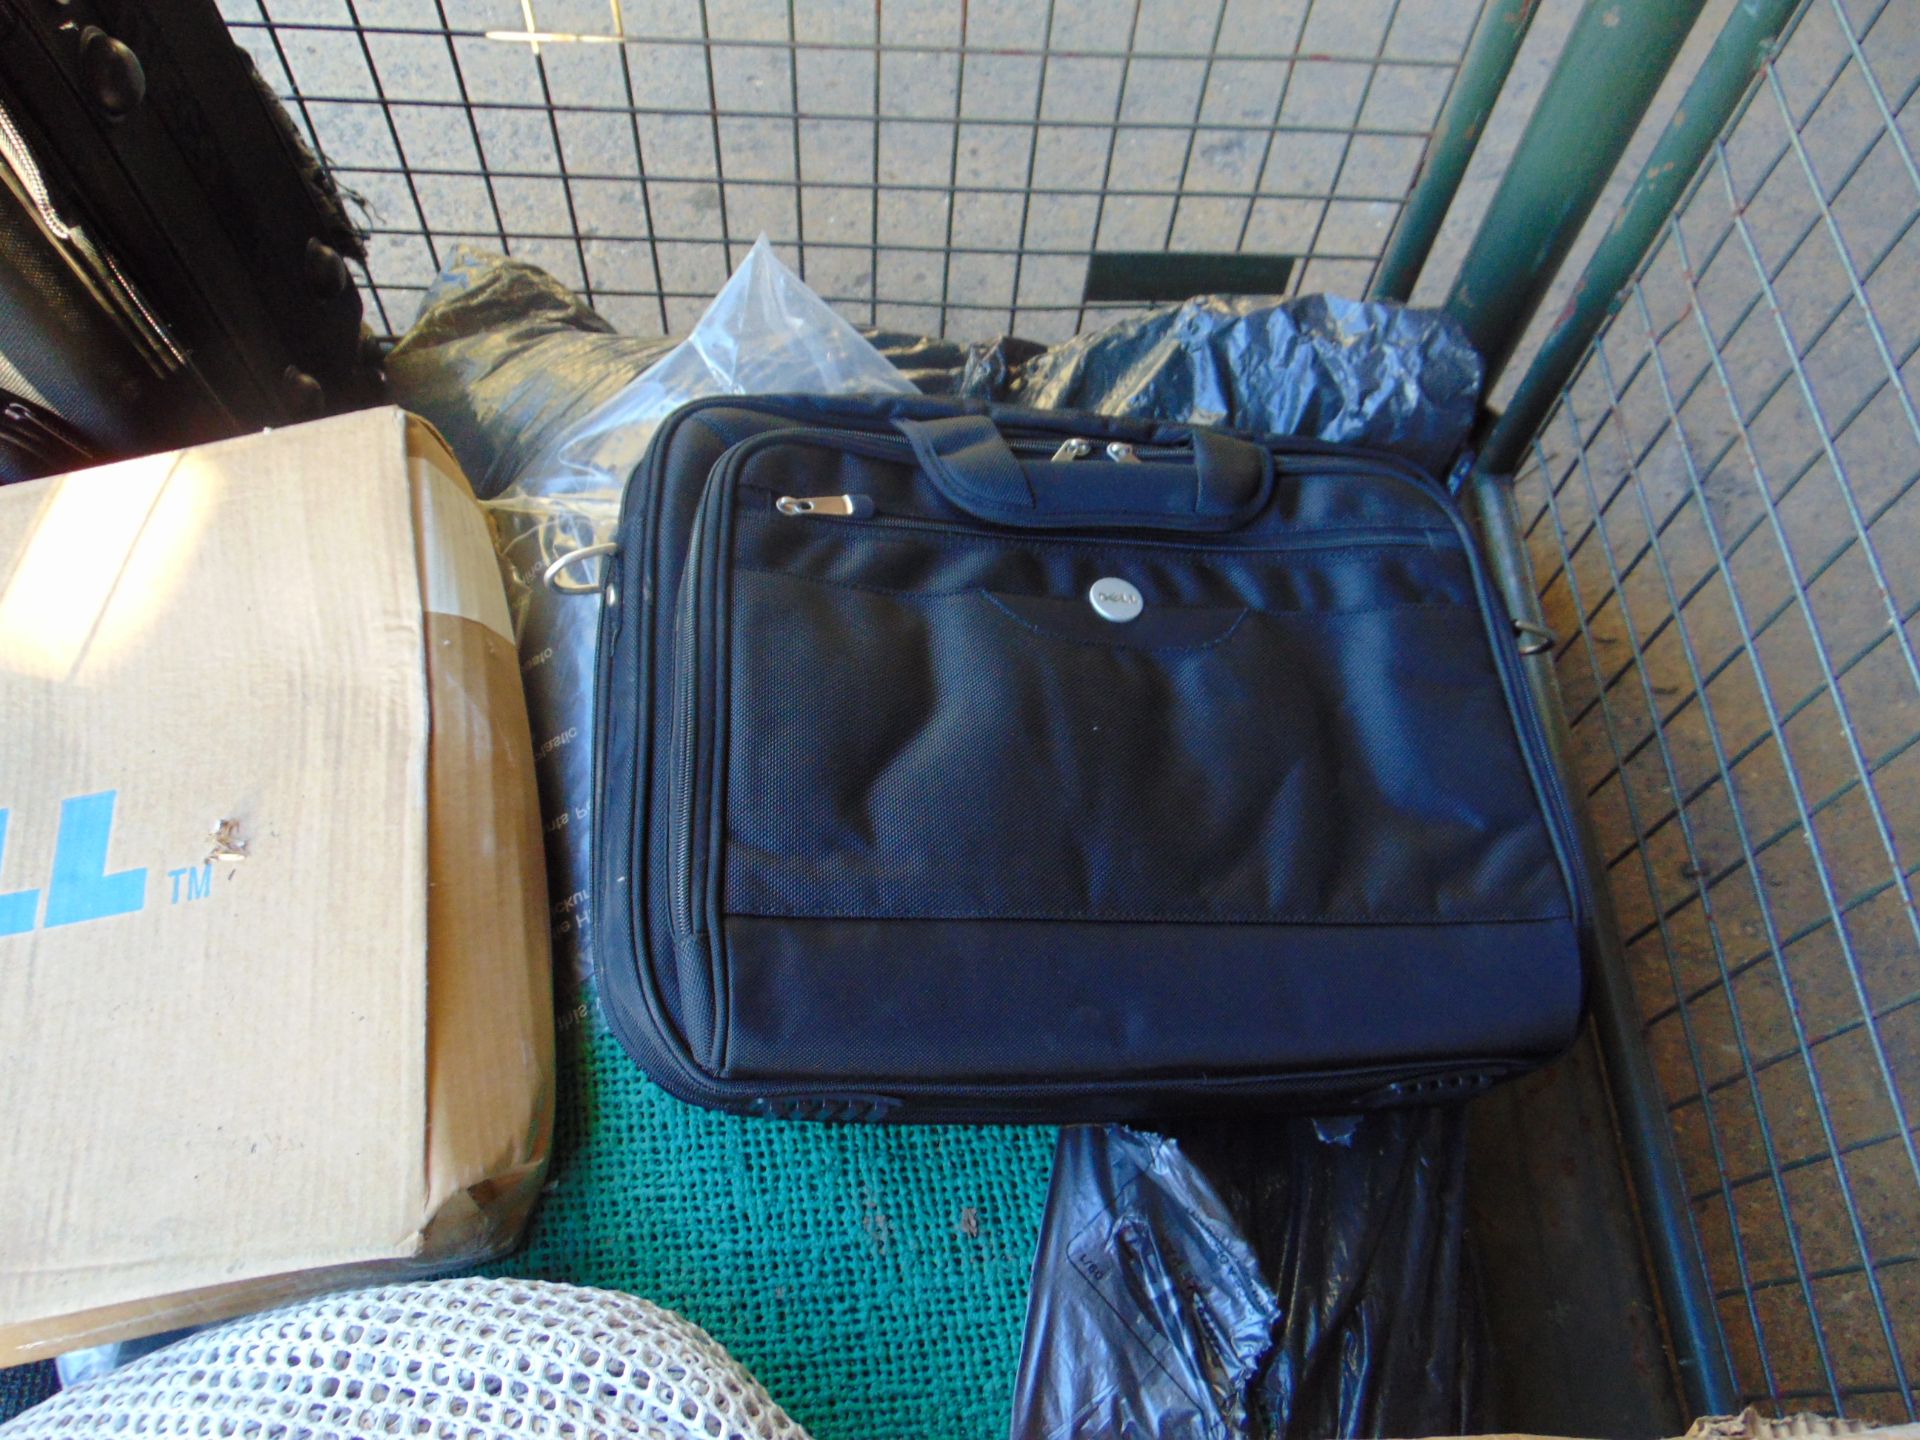 1 x Stillage New Unused 2 x DELL Laptop Bags, Canvas Sheets, Carry on Bag etc - Image 3 of 7